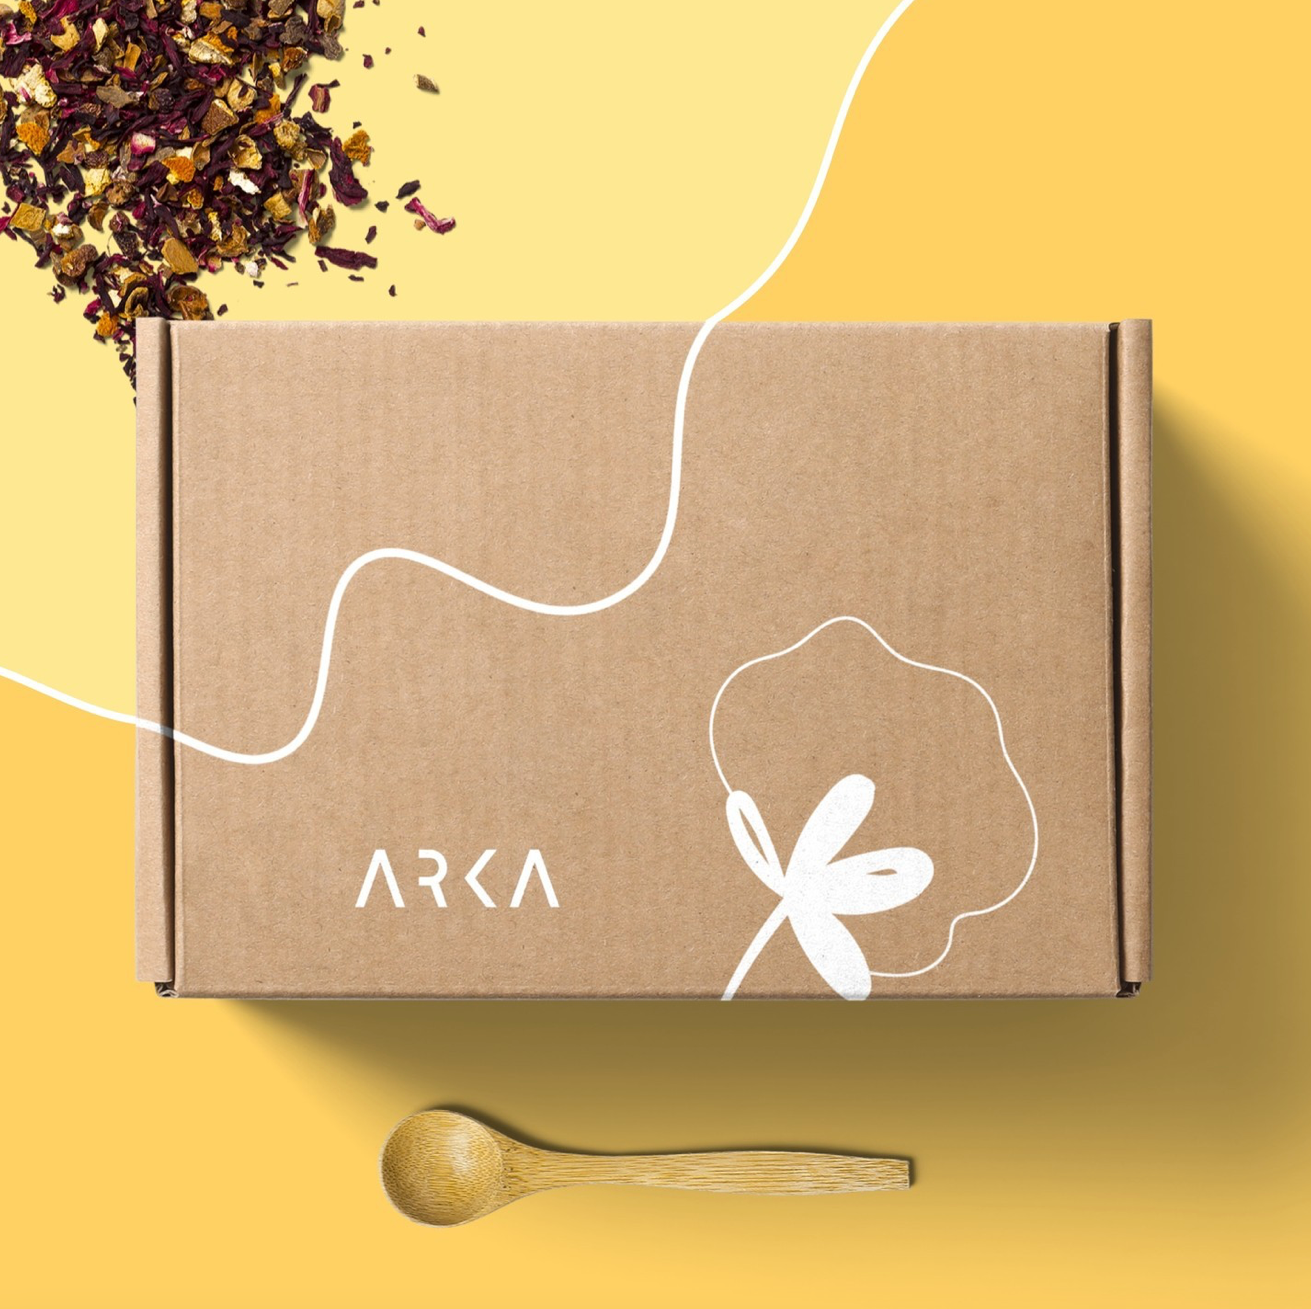 Minimalist Packaging Design: Proven Ways to Get Aesthetics and Functionality